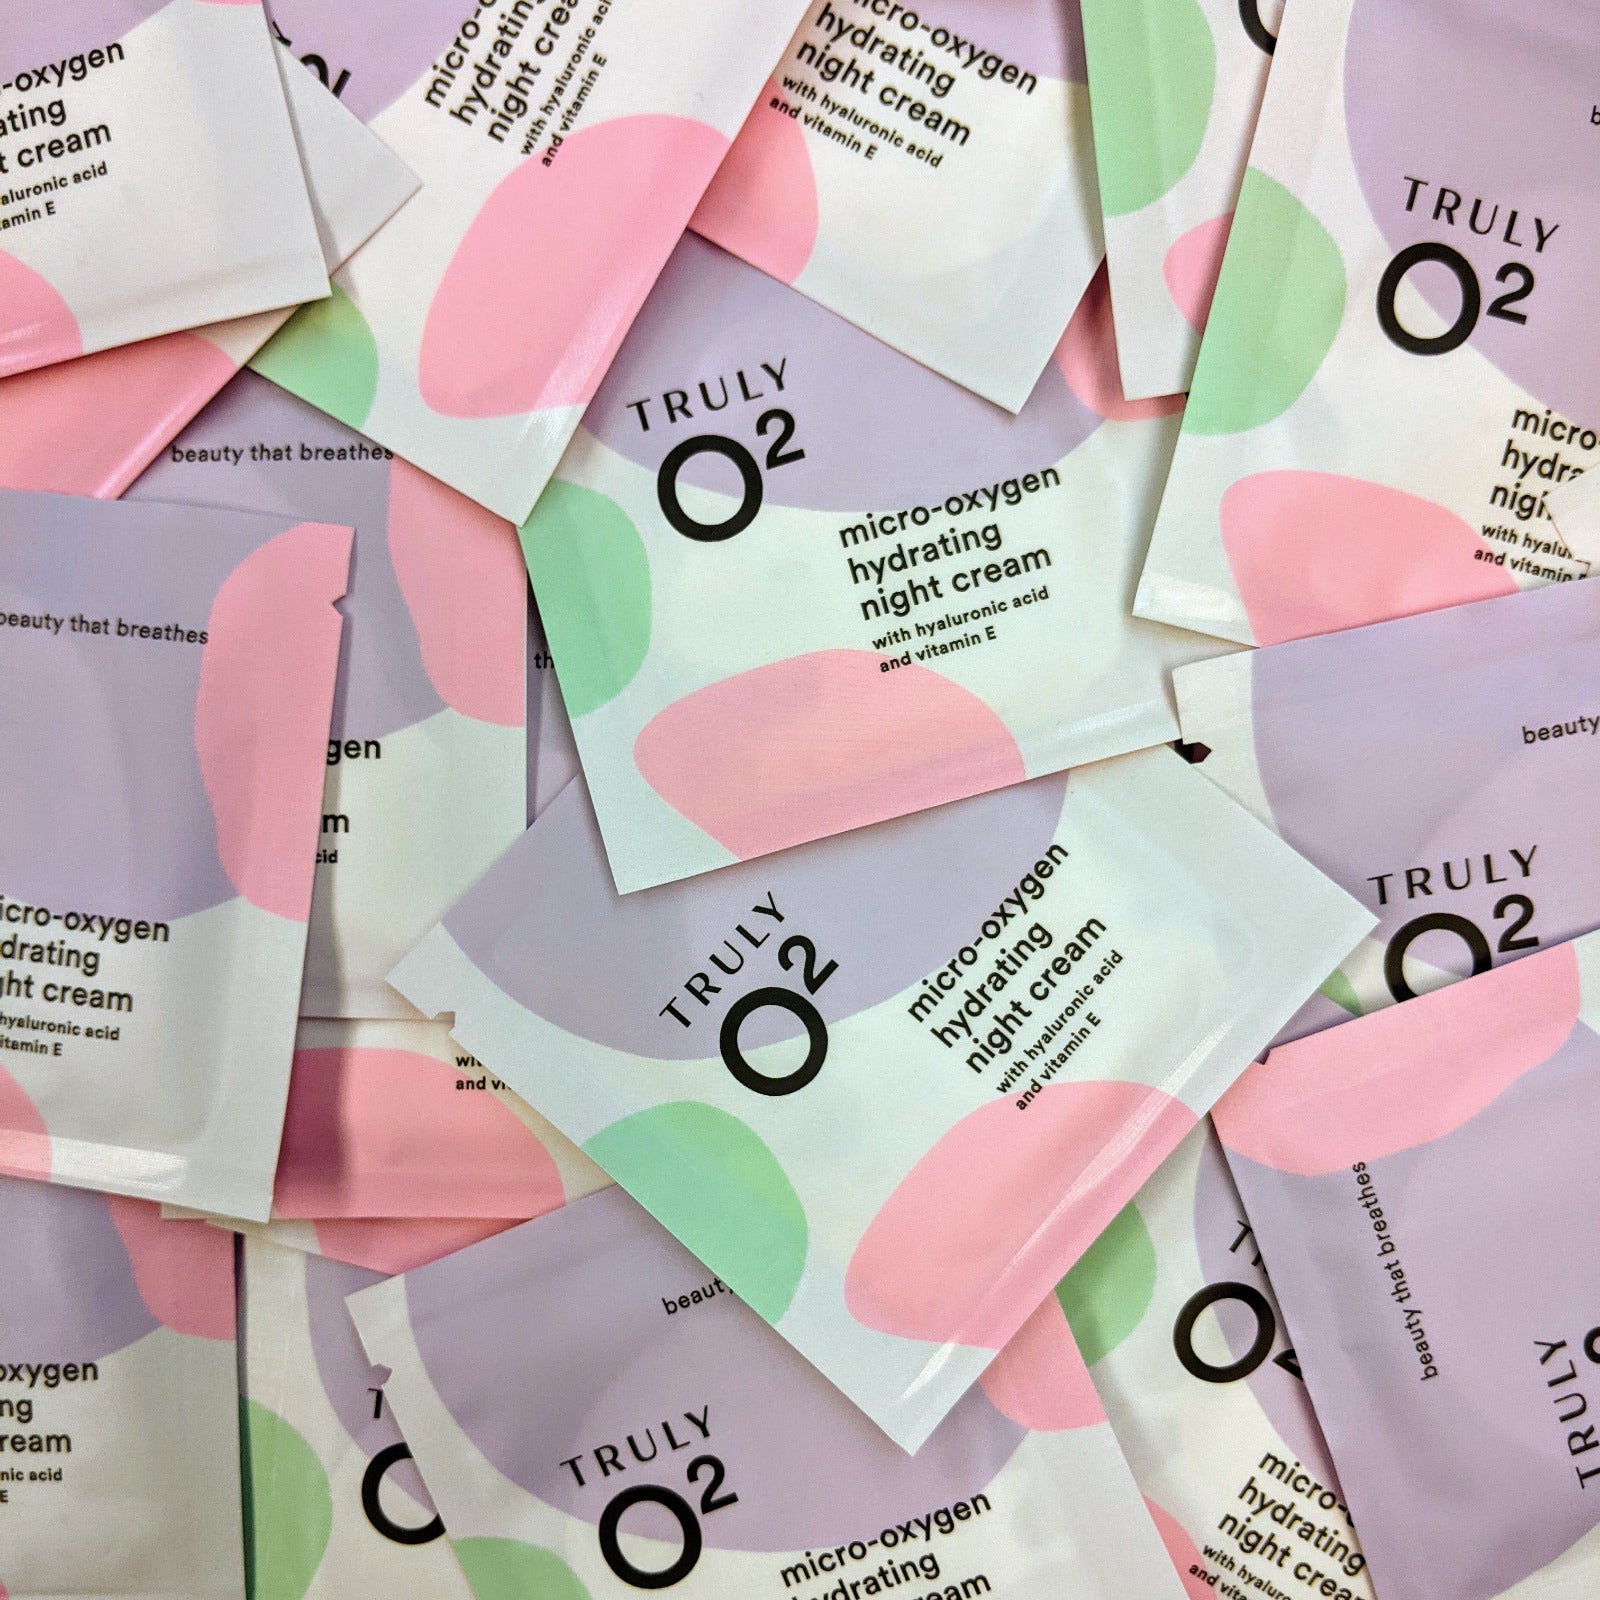 Truly O2 micro-oxygen hydrating night cream sample packets